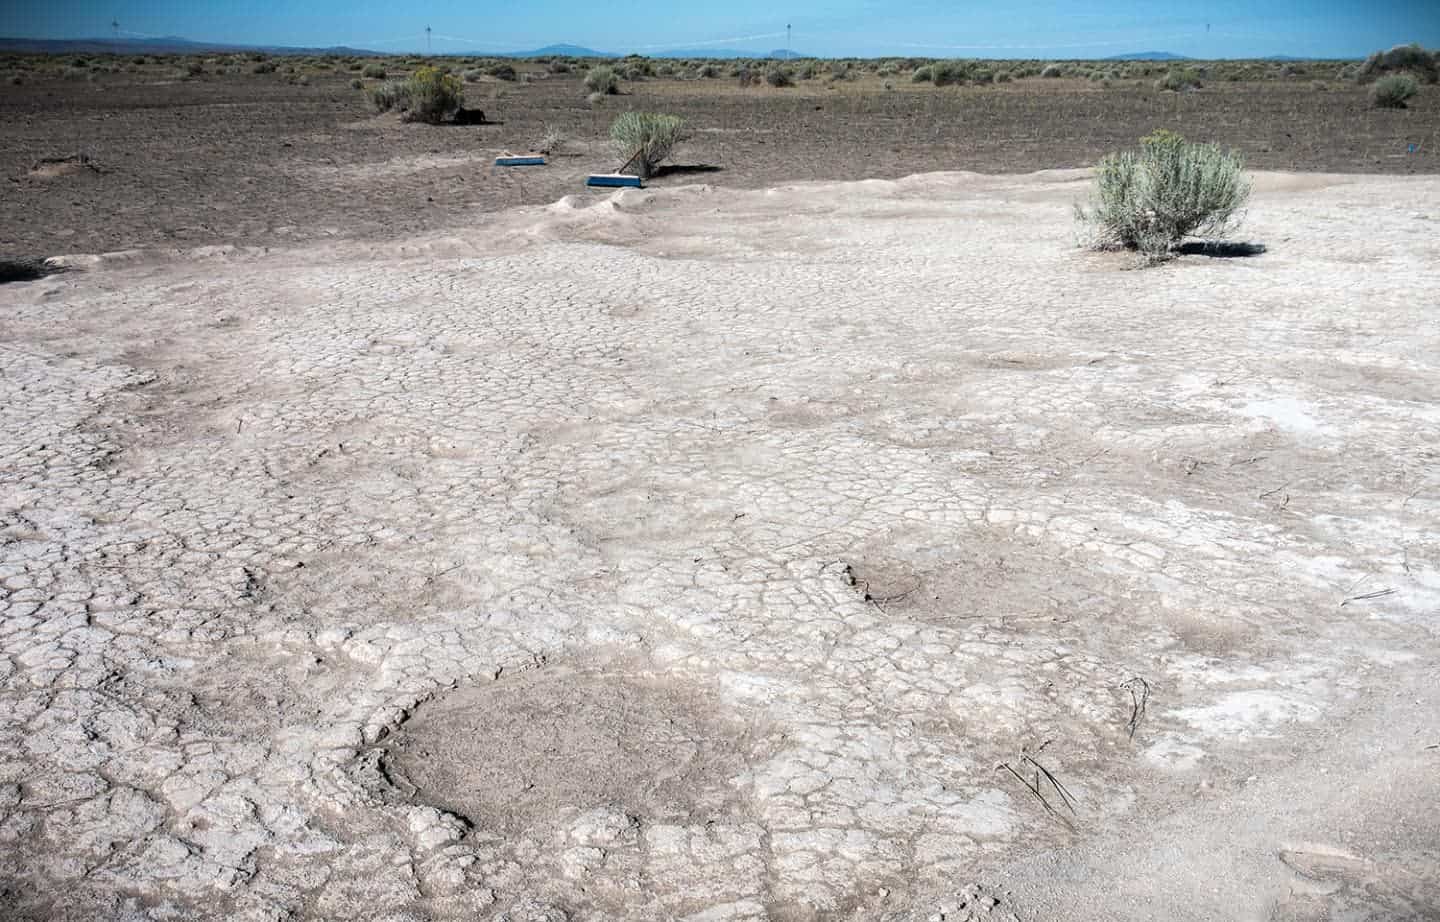 Mammoth footprints dated to 43,000 years ago,which were uncovered by researchers in 2017 in an ancient dry lake bed in Lake County, Oregon. CreditȘ Greg Shine/Bureau of Land Management.